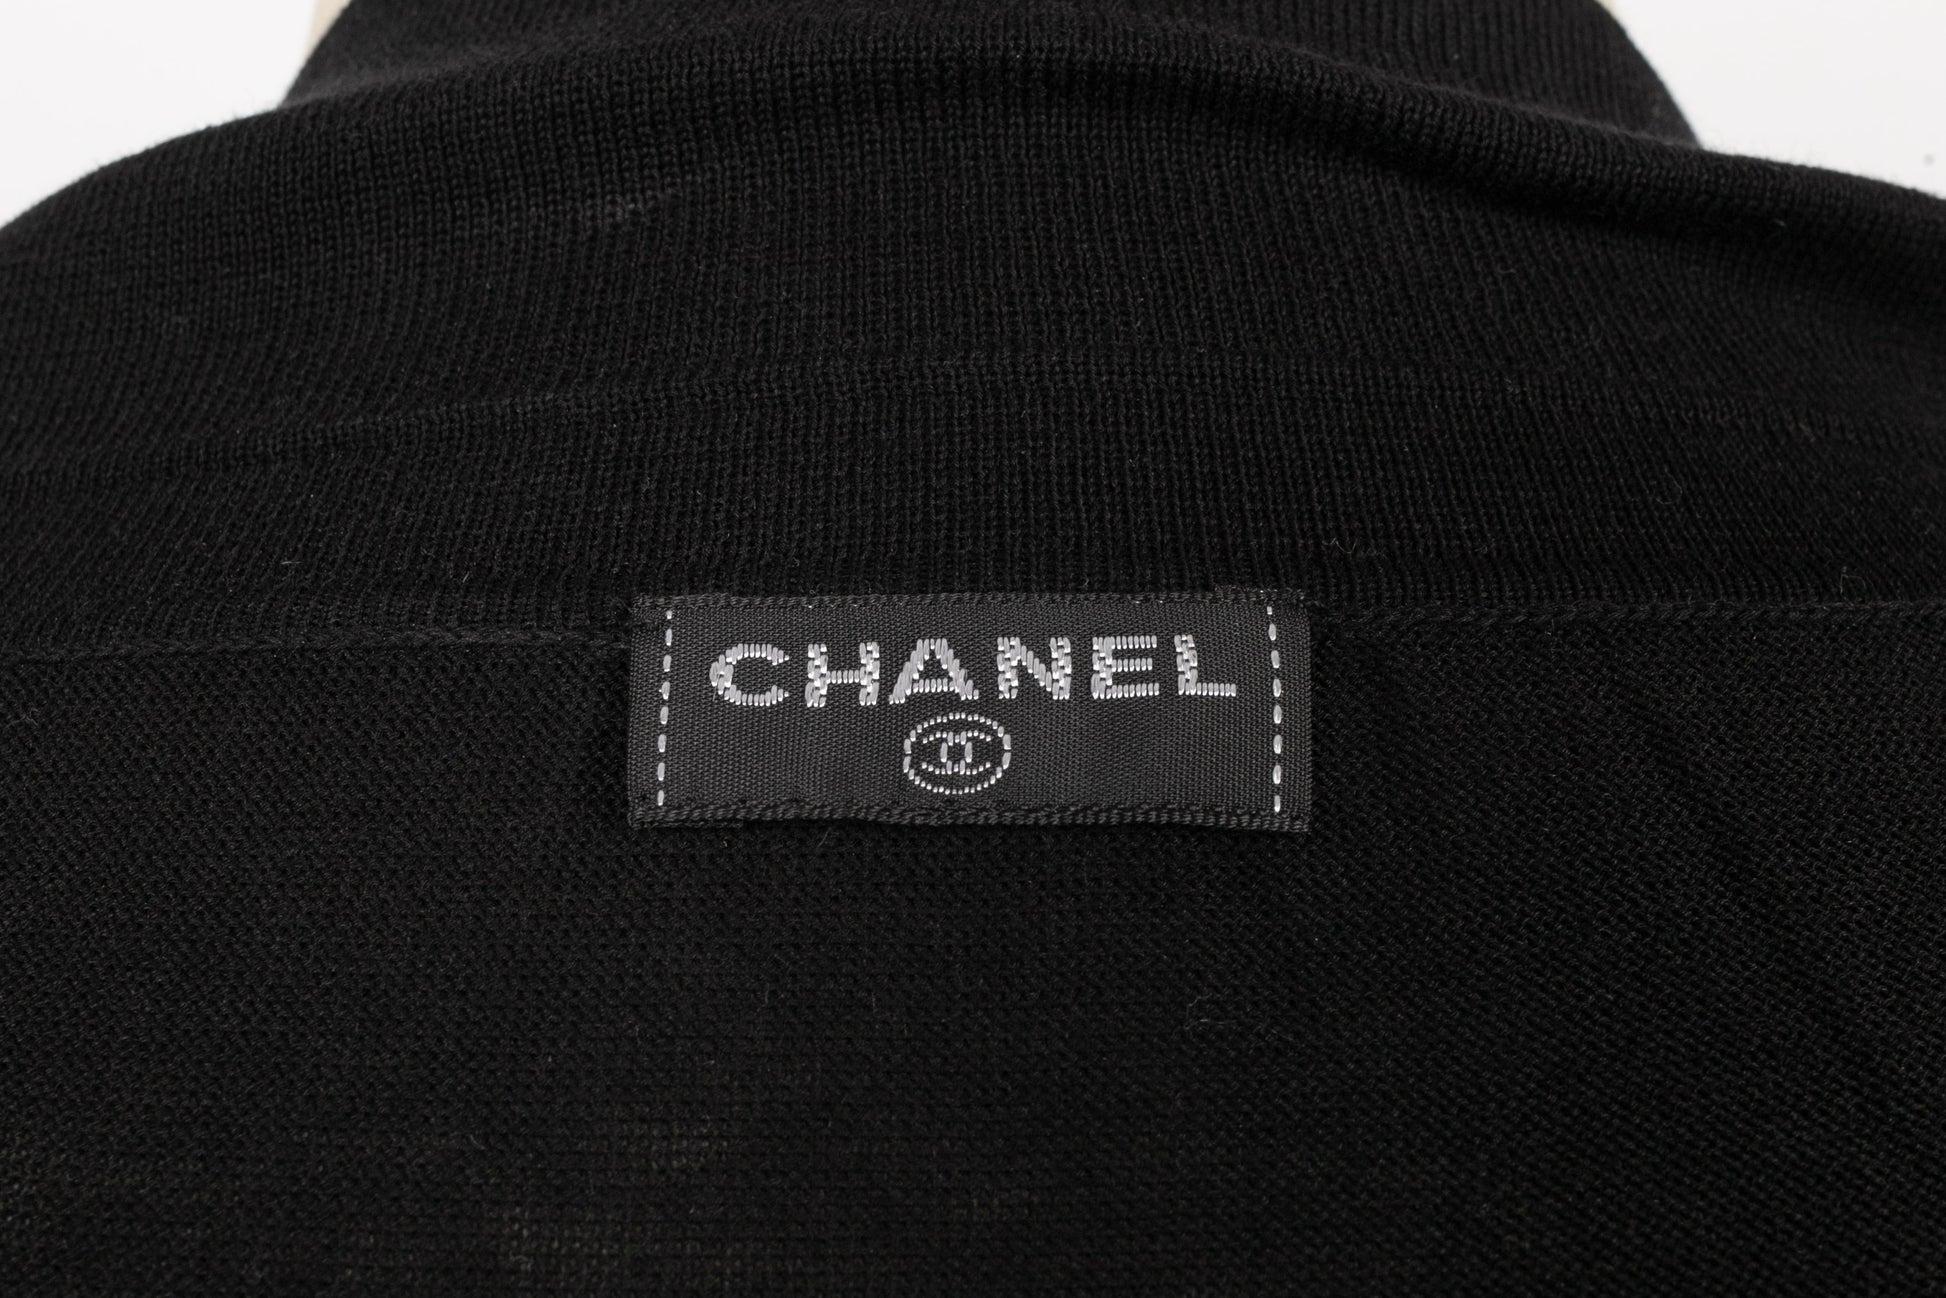 Chanel Black Mesh Top For Sale 3